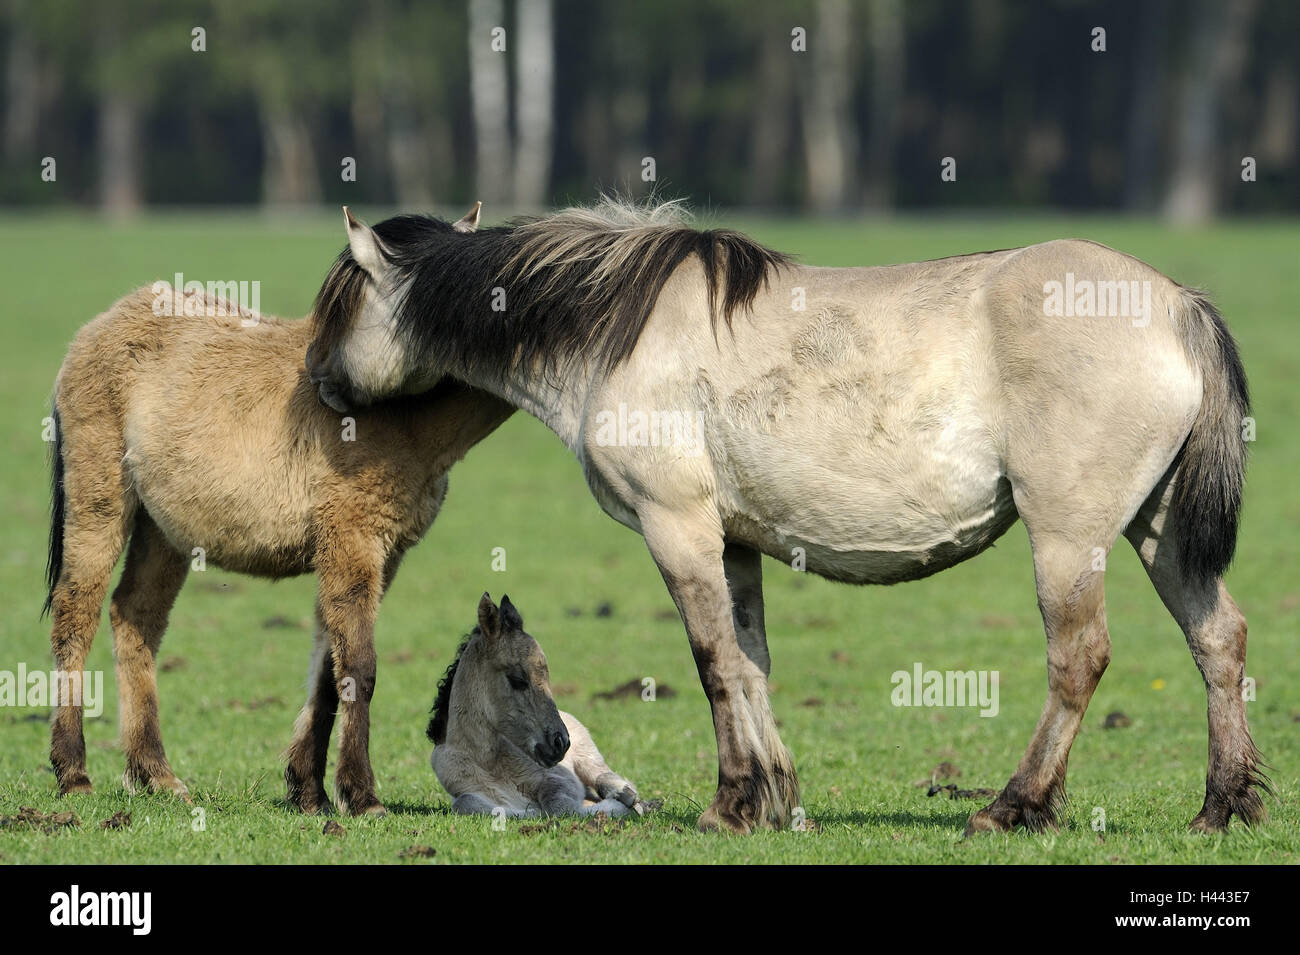 Of Dülmener wild horses, mare, yearling, foal, Germany, Nordrheinwestfahlen, place of interest, natural monument, Wildpferdgestüt, nature reserve, nature conservation, horses, horse's race, young animal, mammals, animals, outside, whole body, Stock Photo